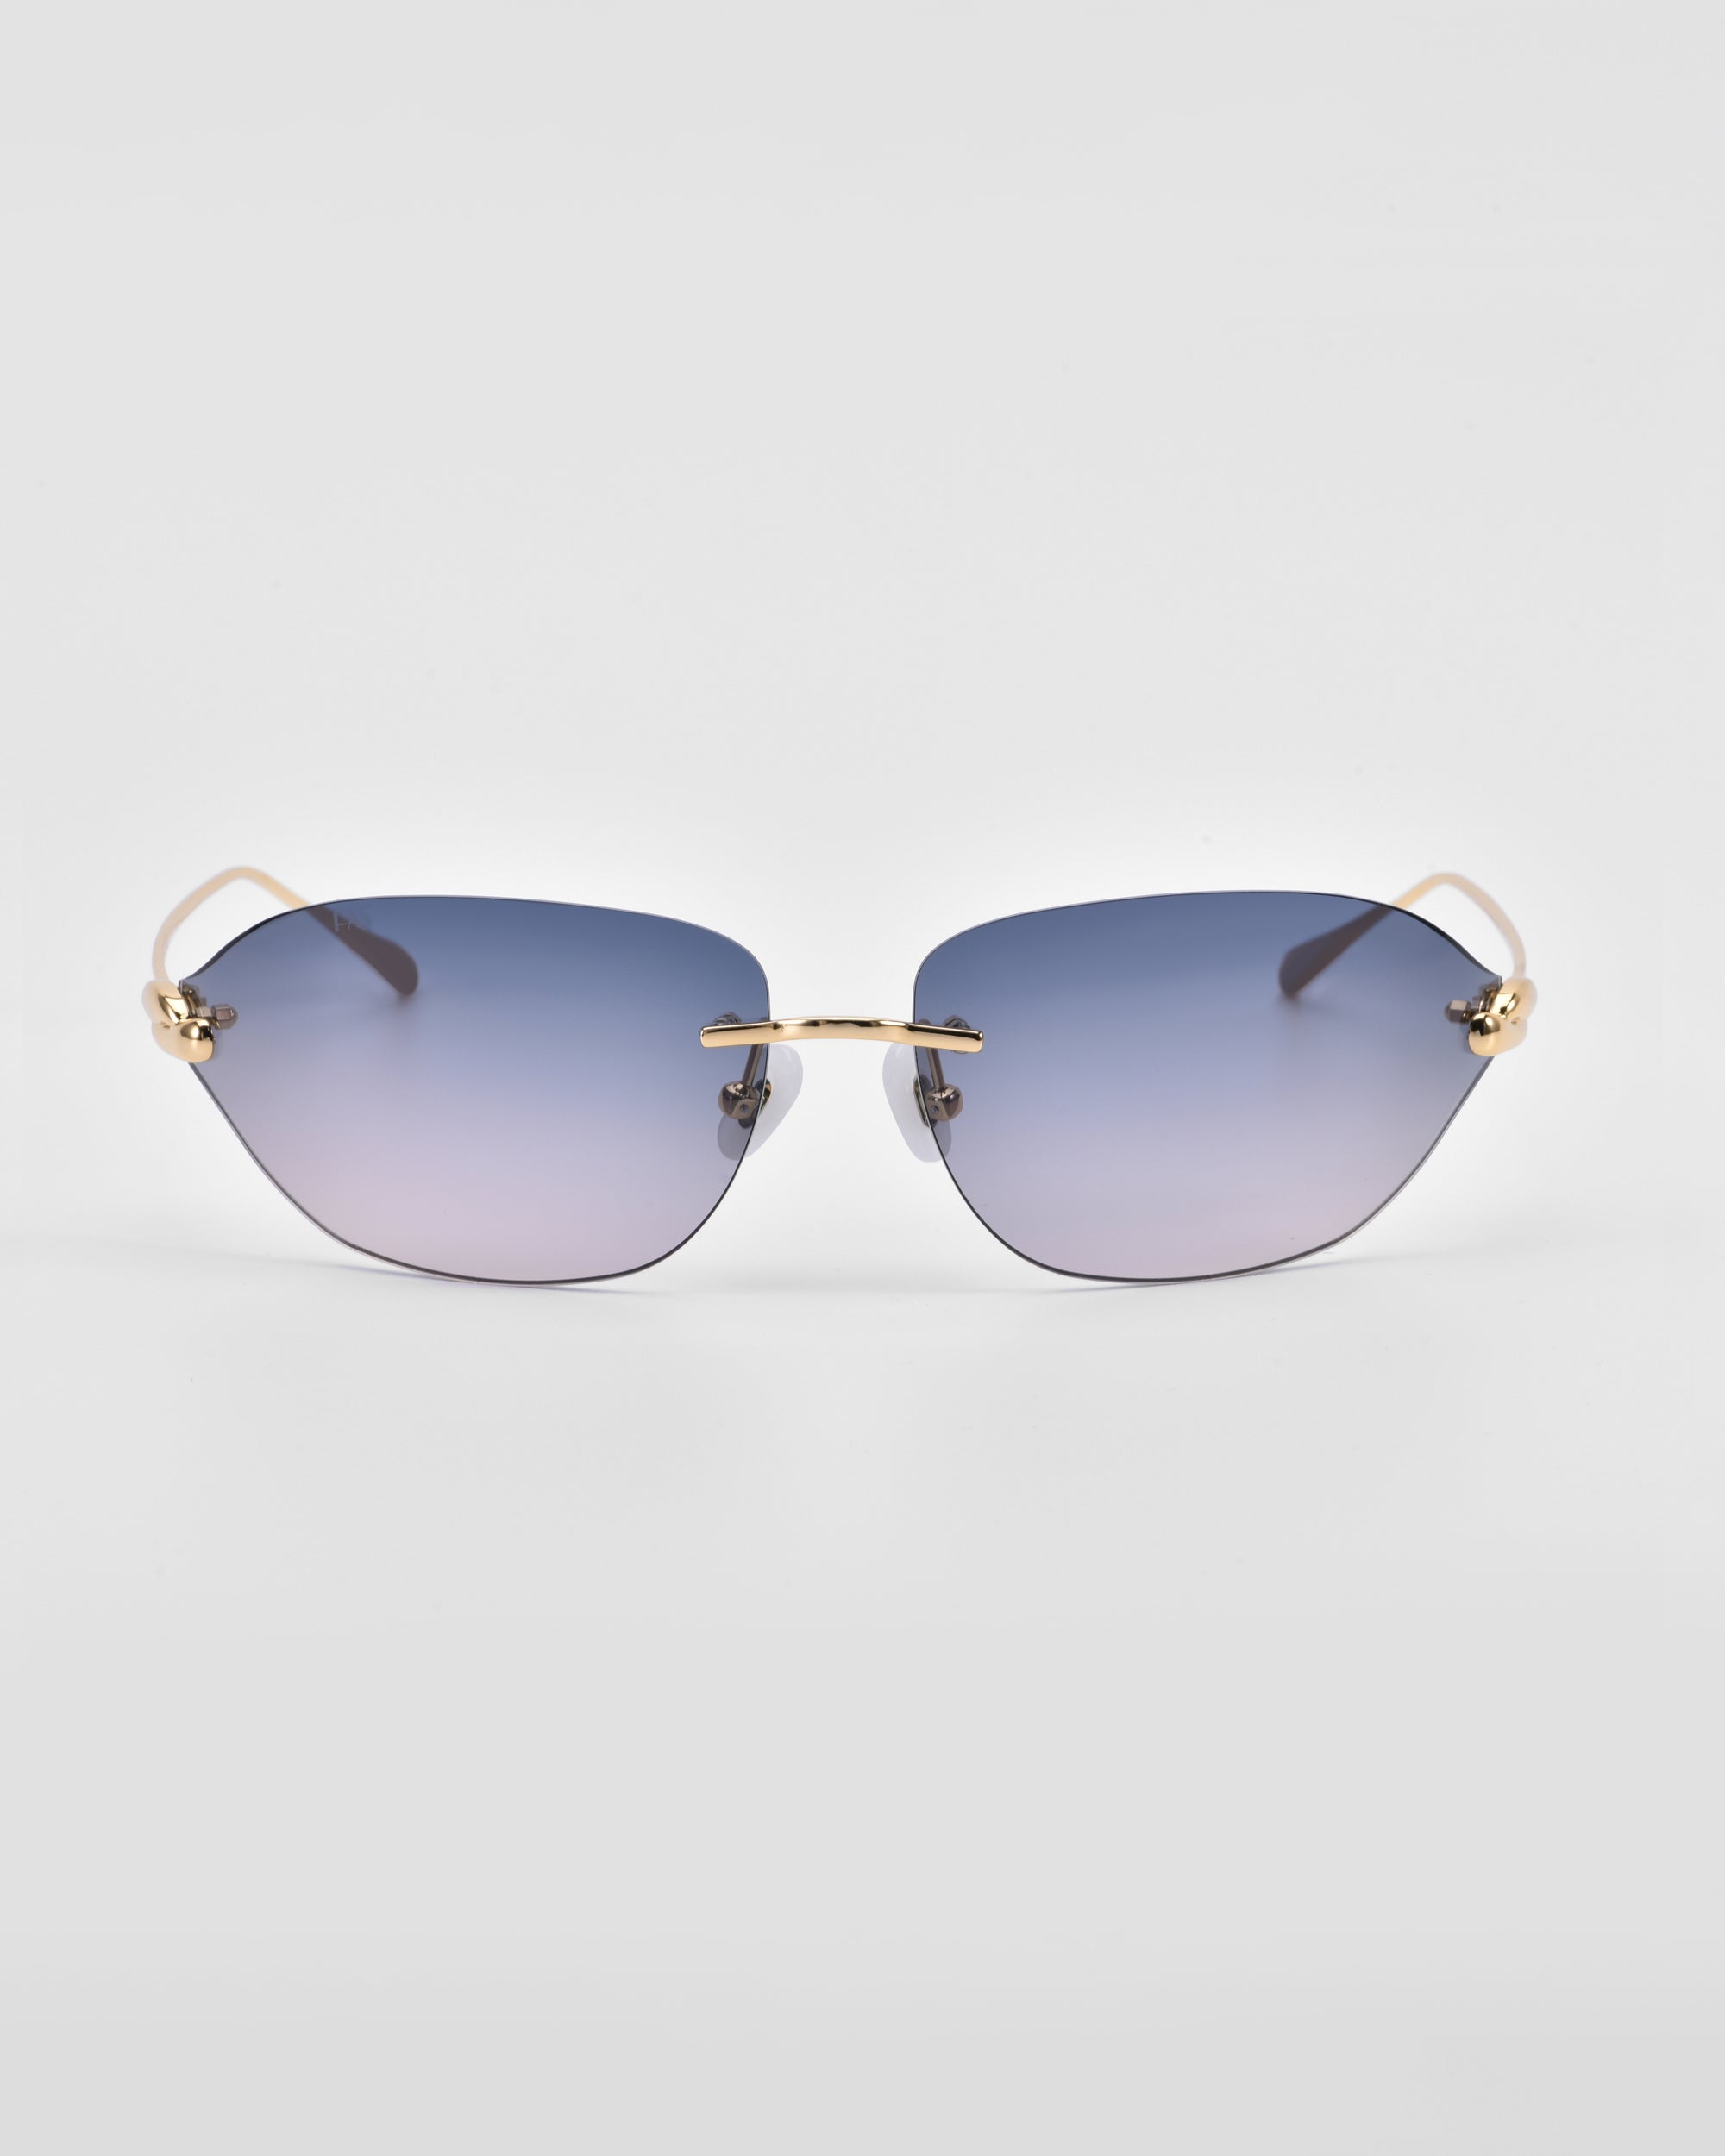 A pair of For Art's Sake® Serpent I rimless sunglasses with gradient blue-tinted lenses and 18-karat gold-plated arms and bridge. The arms have small decorative elements near the hinges. The background is plain white.